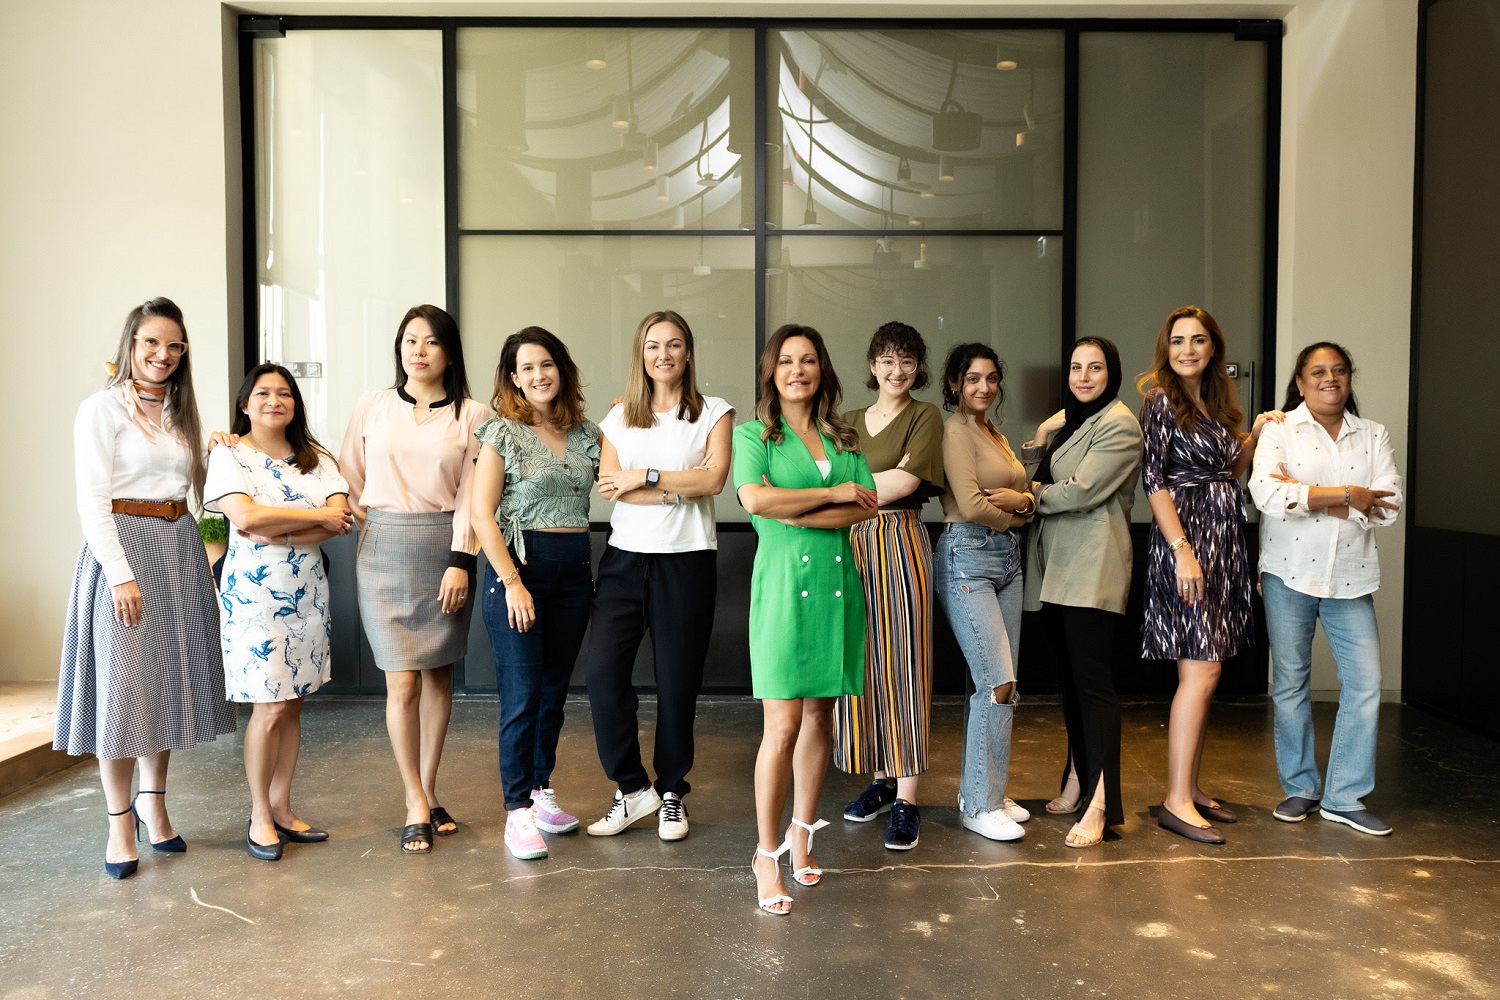 Female Membership Platform Wild Women Collective Launches in the UAE